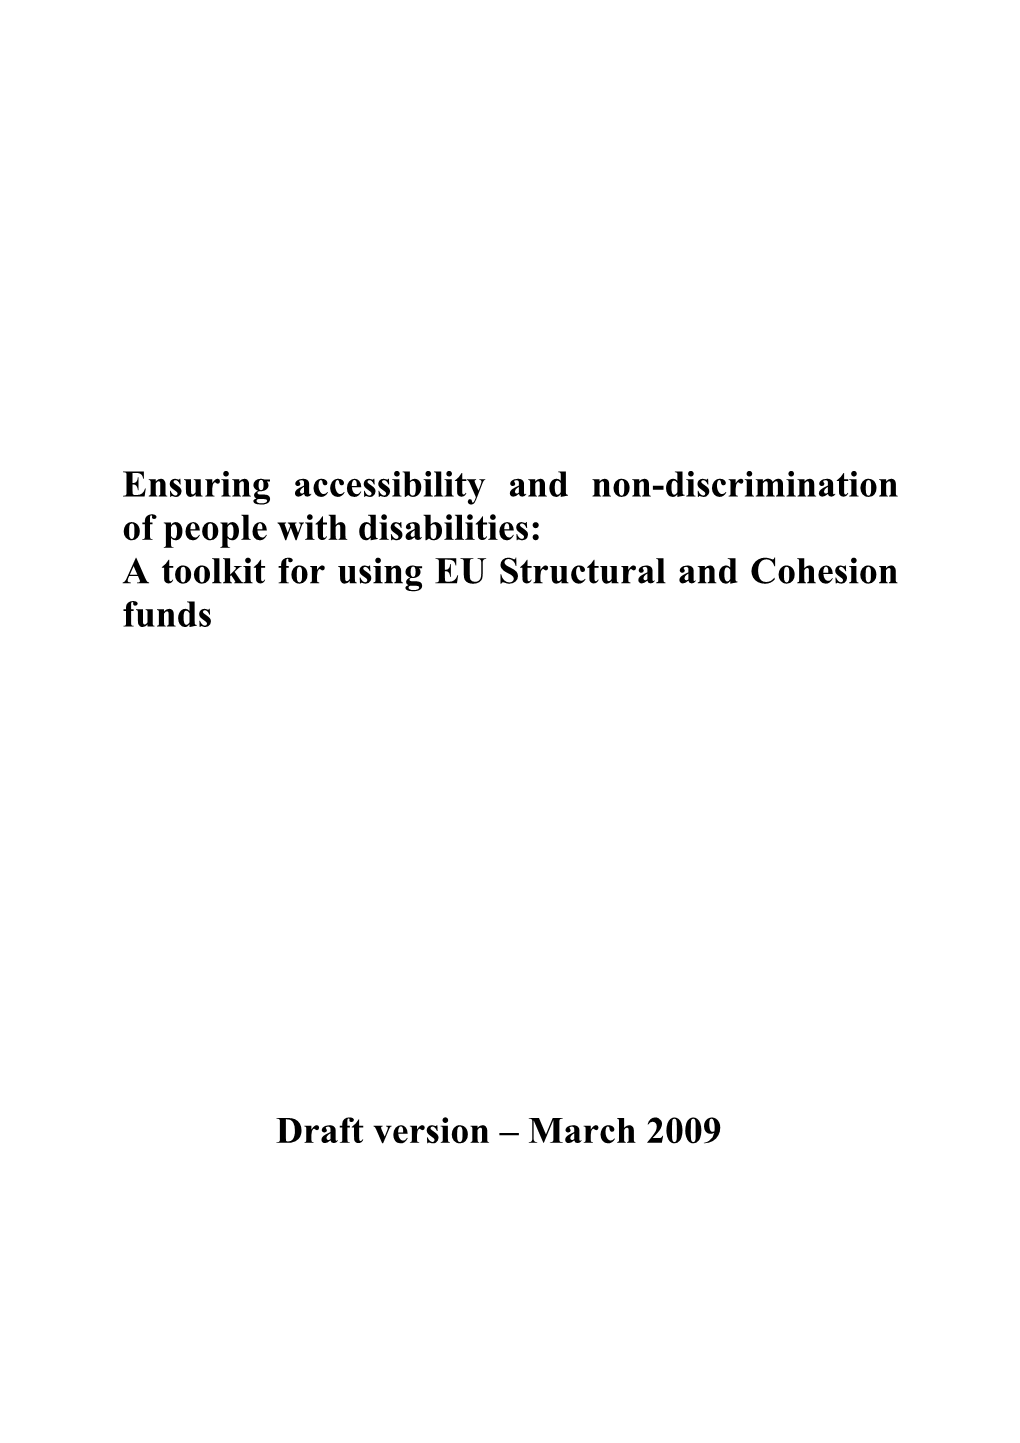 Ensuring Accessibility and Non-Discriminationof People with Disabilities